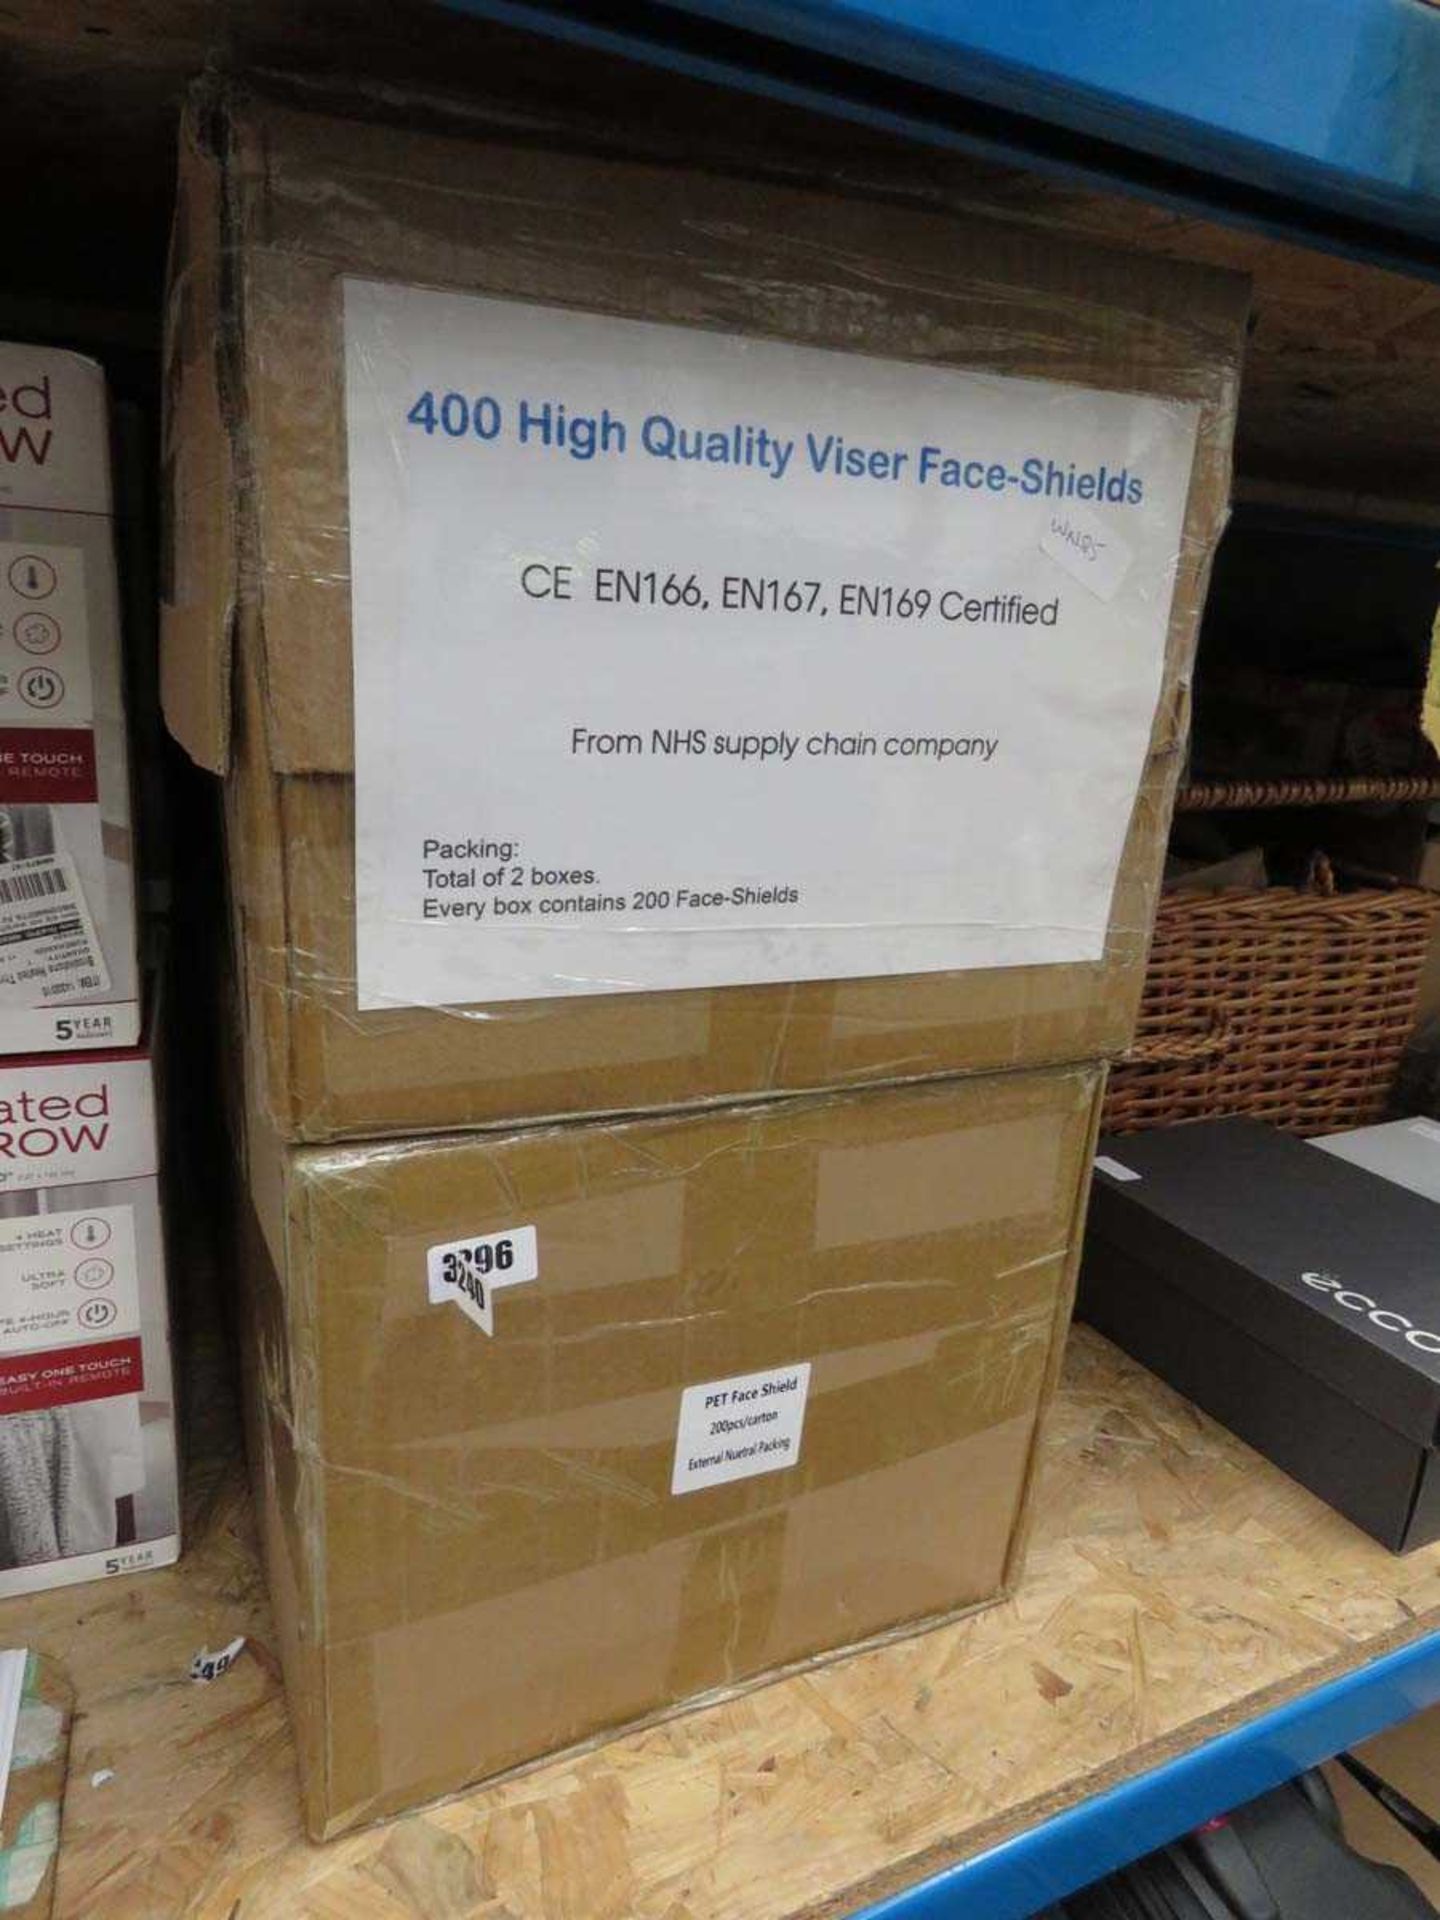 2 boxes of protective visor face-shields